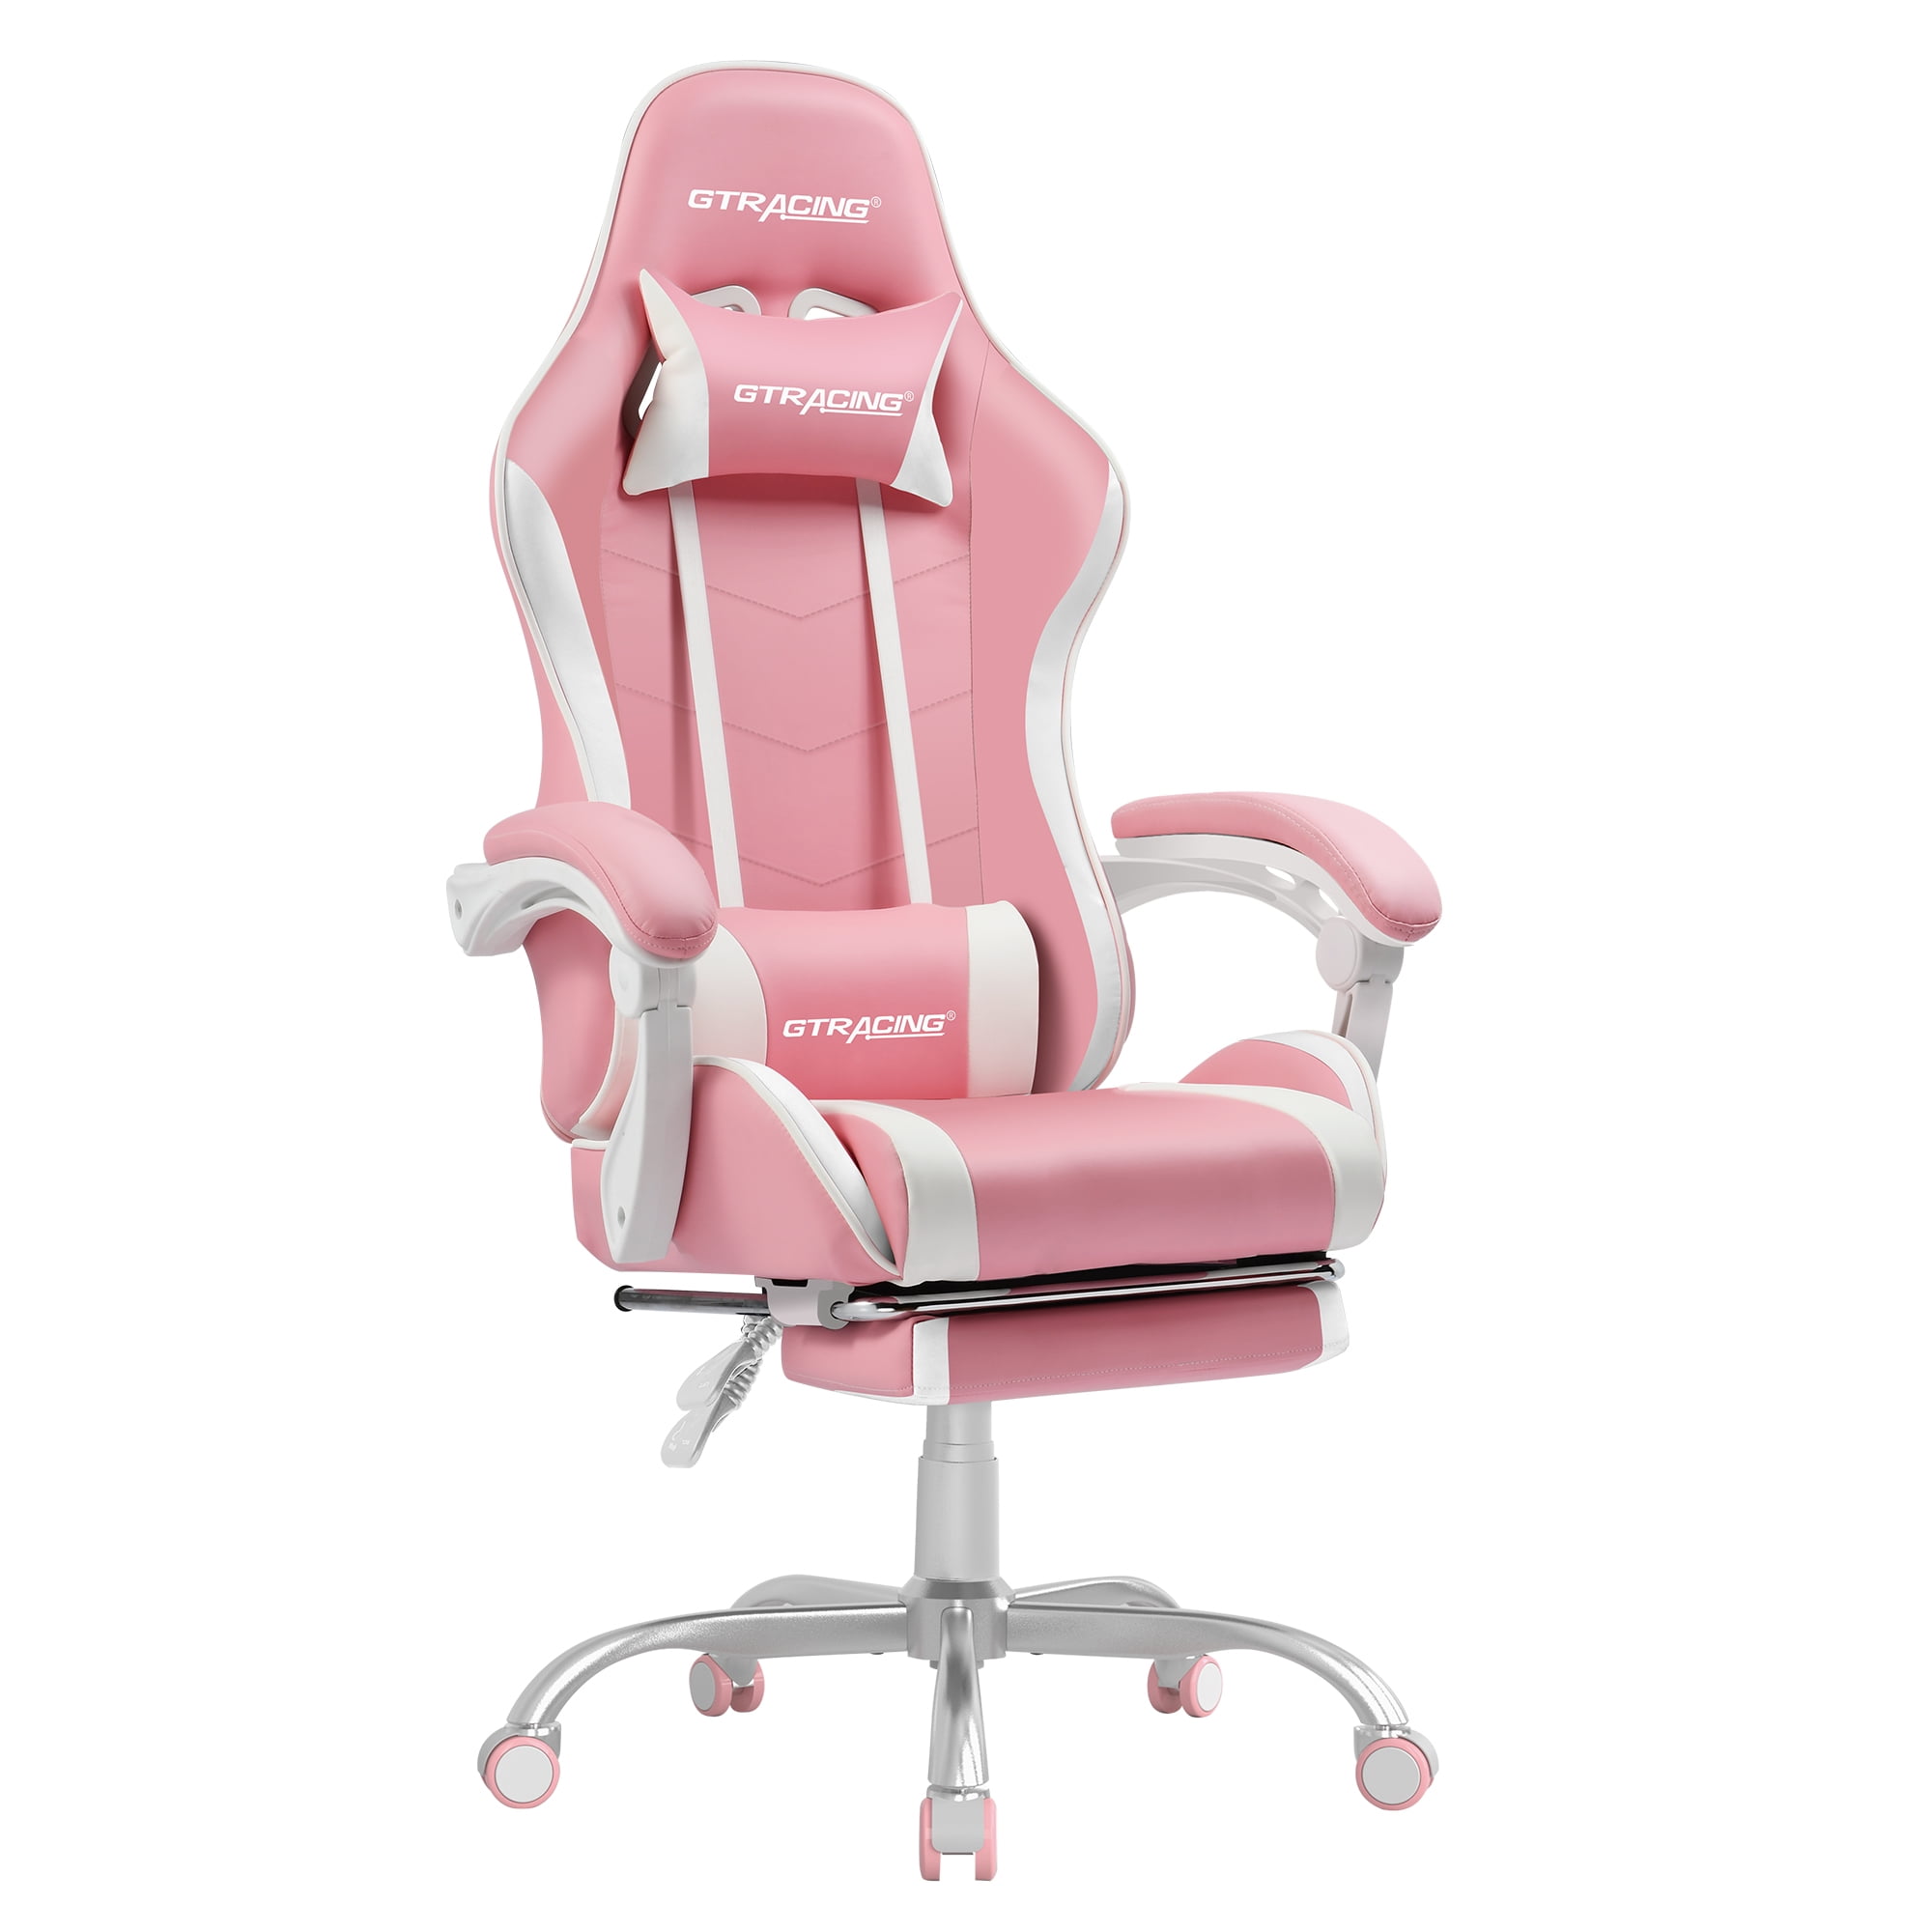 Best Gaming Chairs In Every Color From Red To Pink And Everything Else -  Forbes Vetted